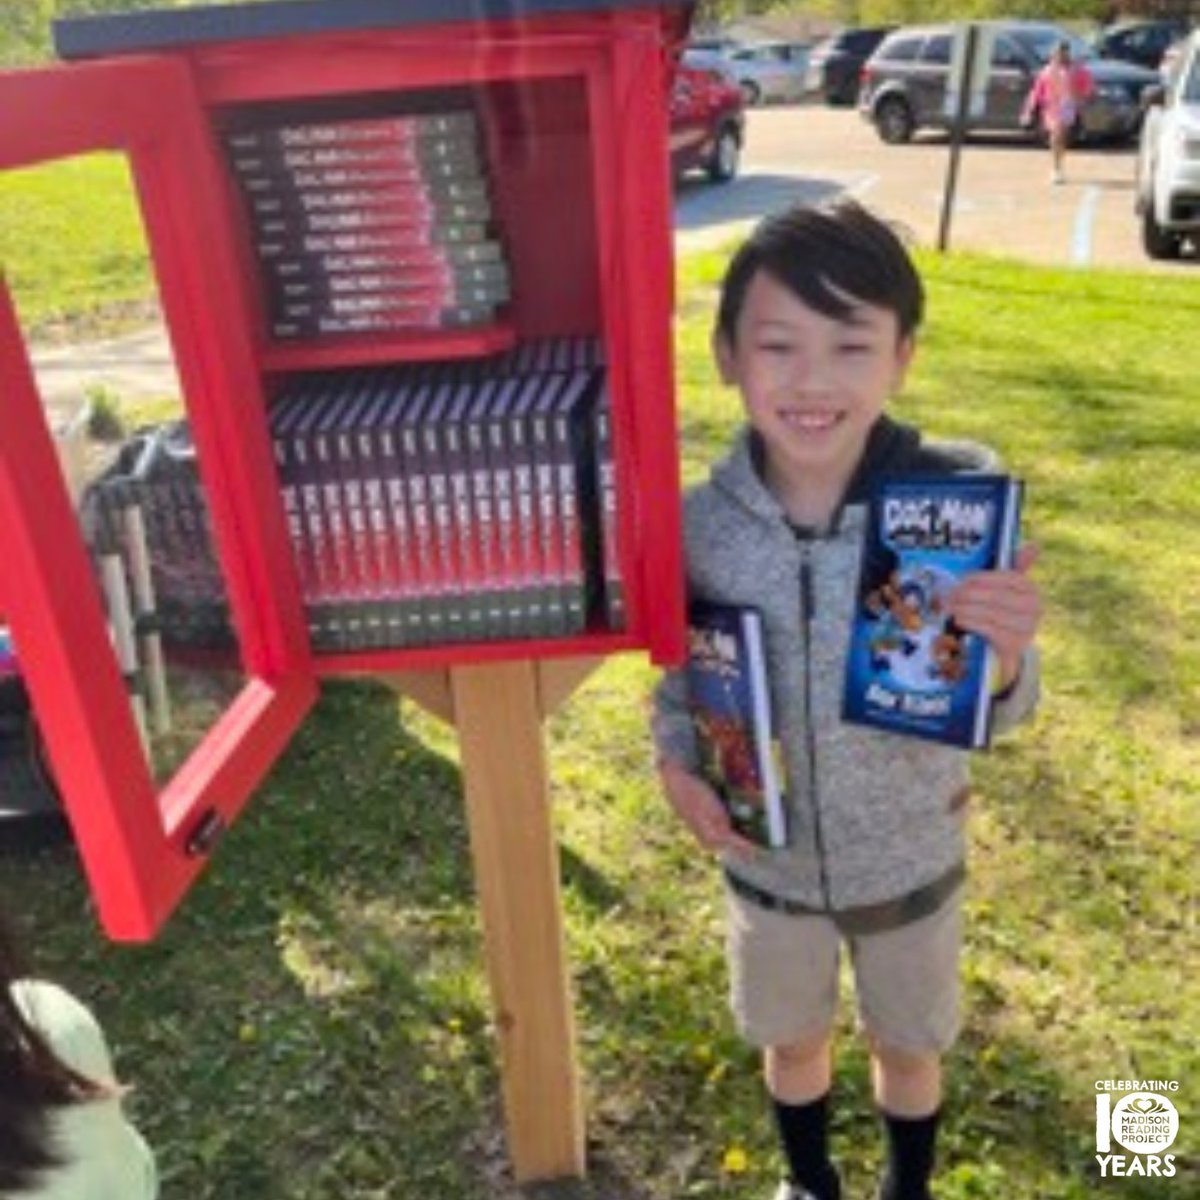 This kiddo from @madisonschools Lake View Elementary brought a pre-loved copy of Dogman to donate to the school's new Little Free Library!
@LtlFreeLibrary @Scholastic 📚📚📚
#LiteracyMatters #NewBookFeeling #MadisonReadingProject